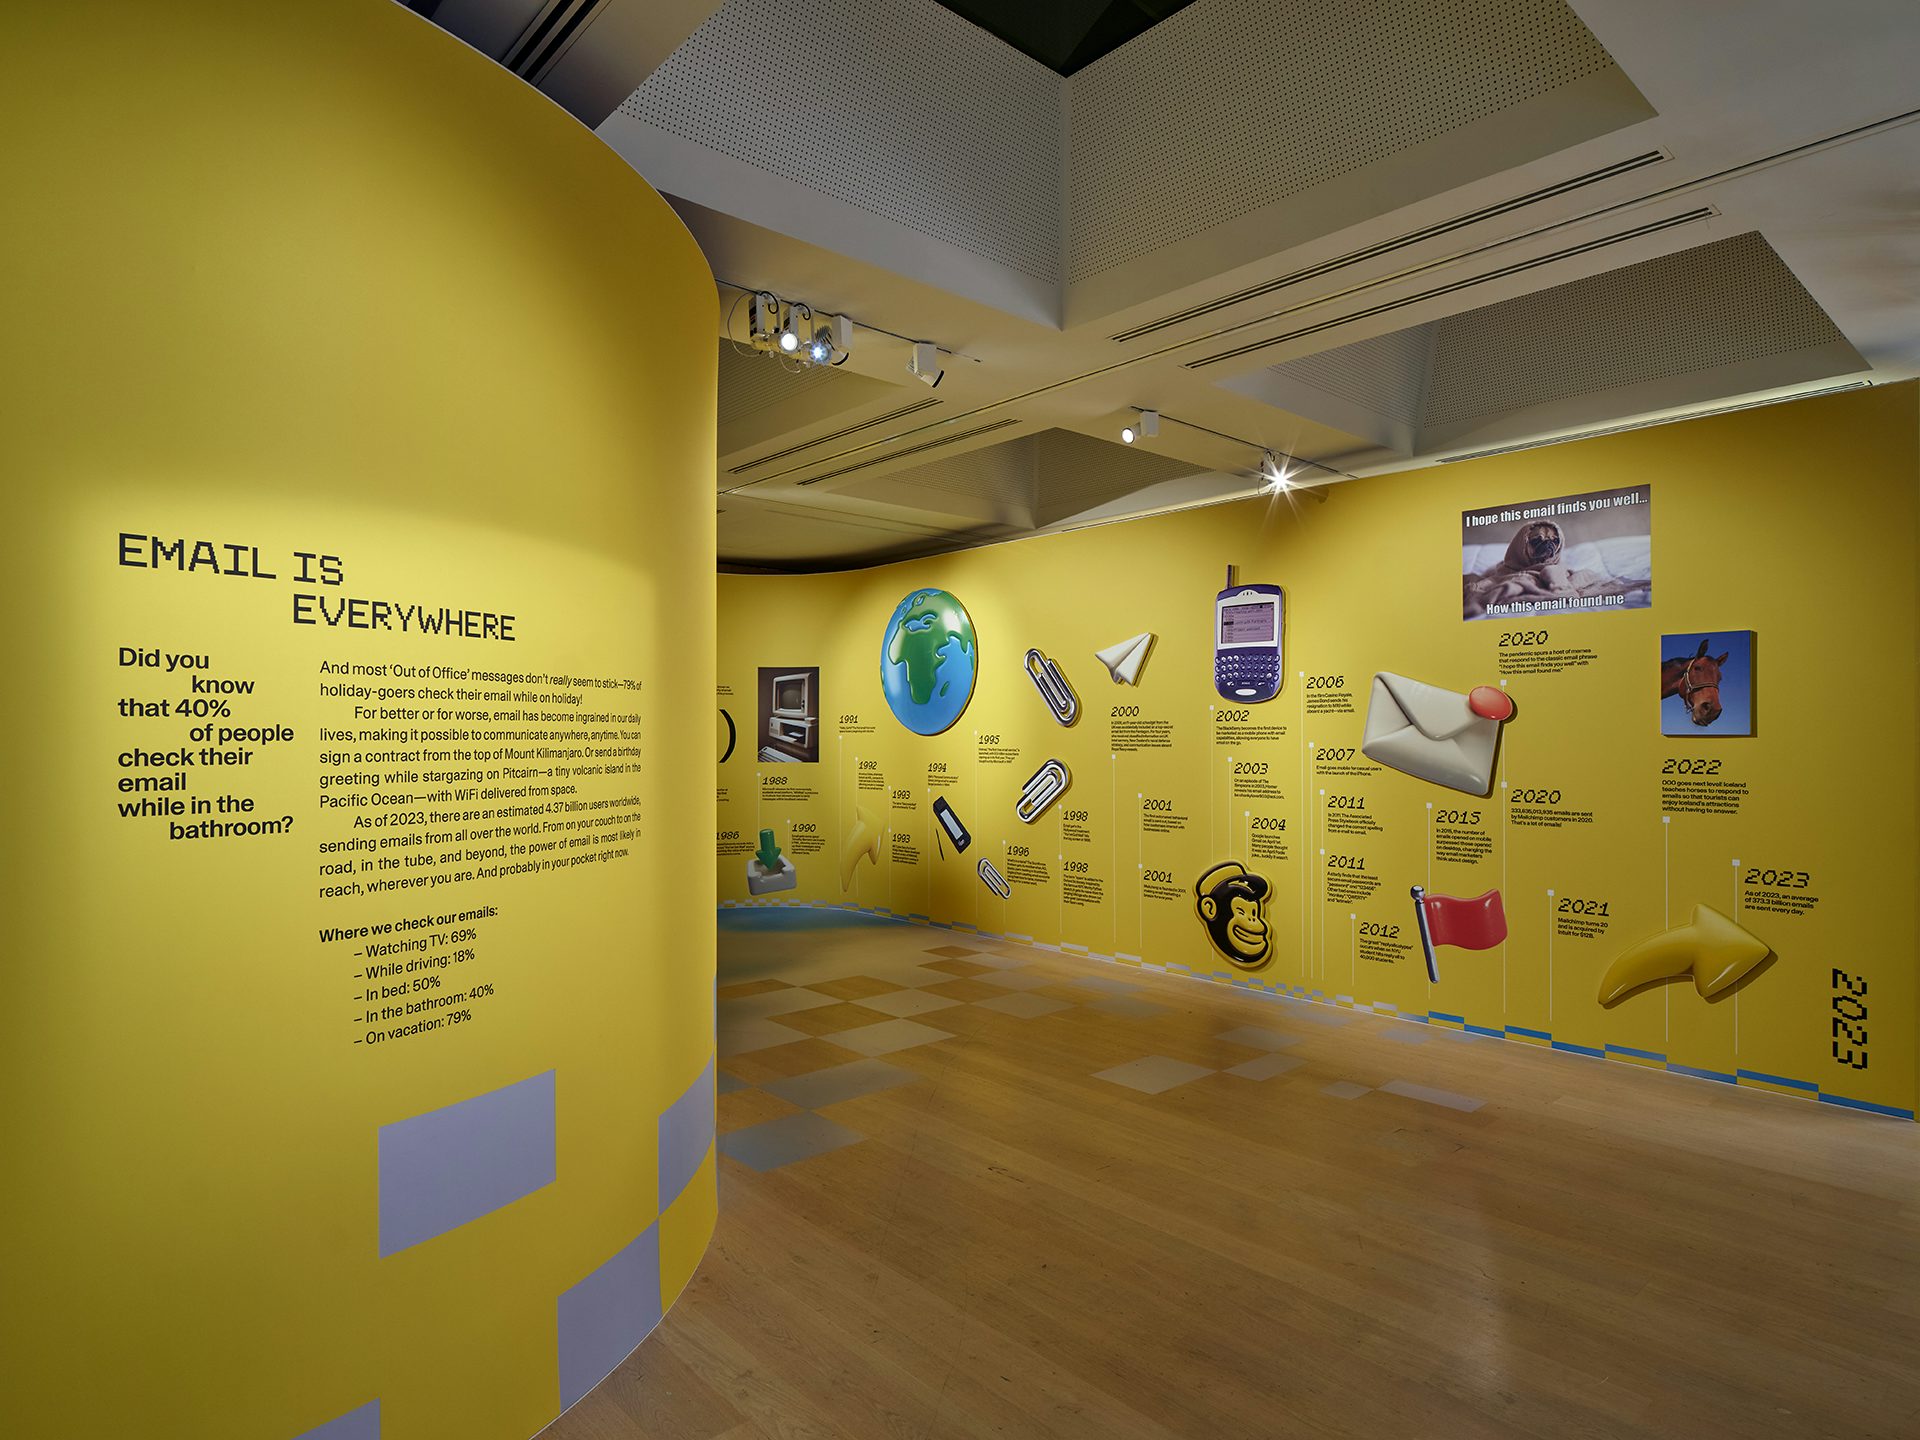 Image shows an install at Mailchimp's Email is Dead exhibition at the Design Museum, featuring an illustrated timeline displayed on a yellow wall